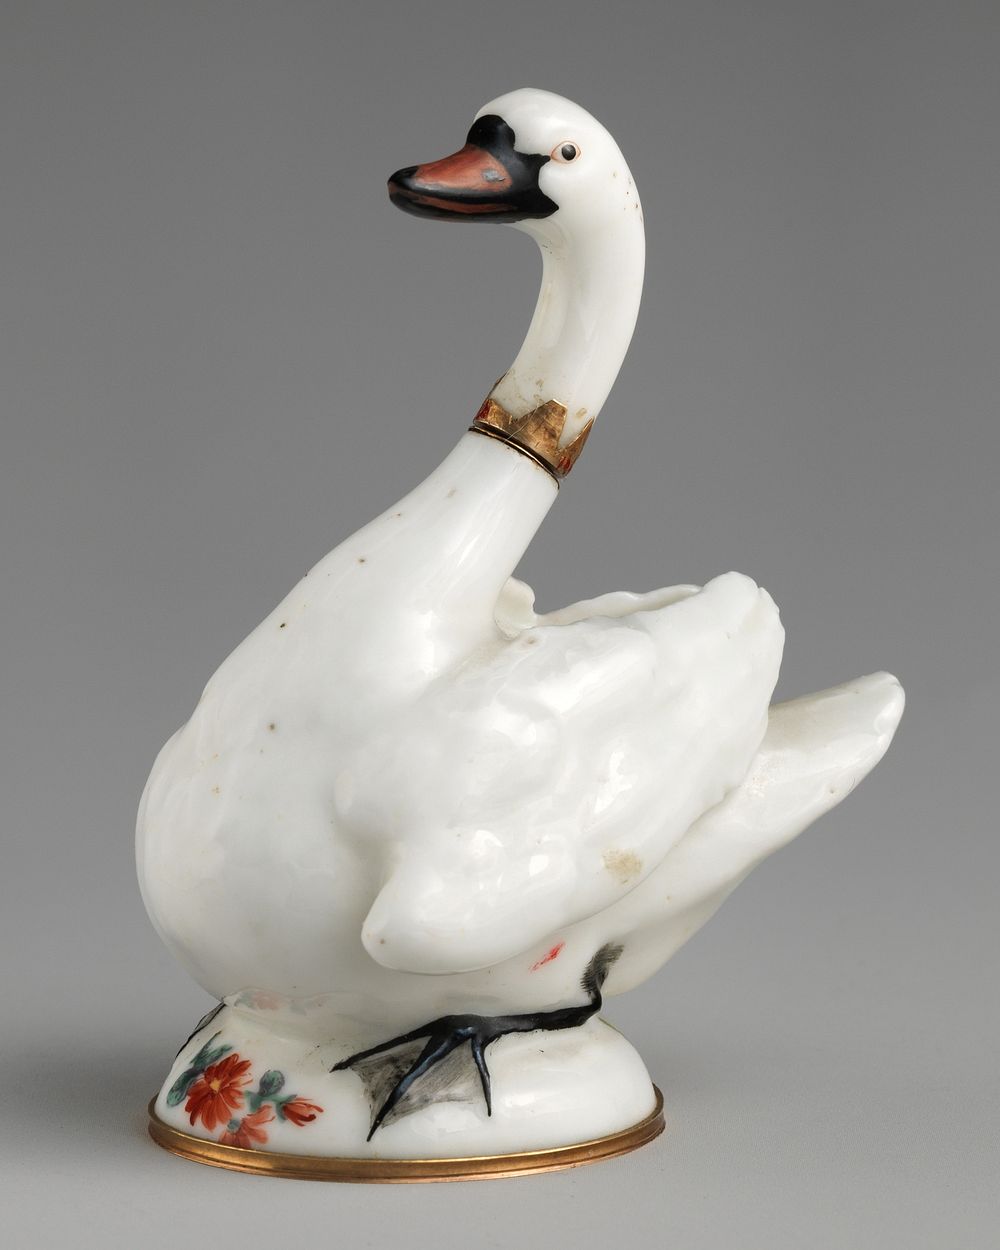 Scent bottle in the form of a swan